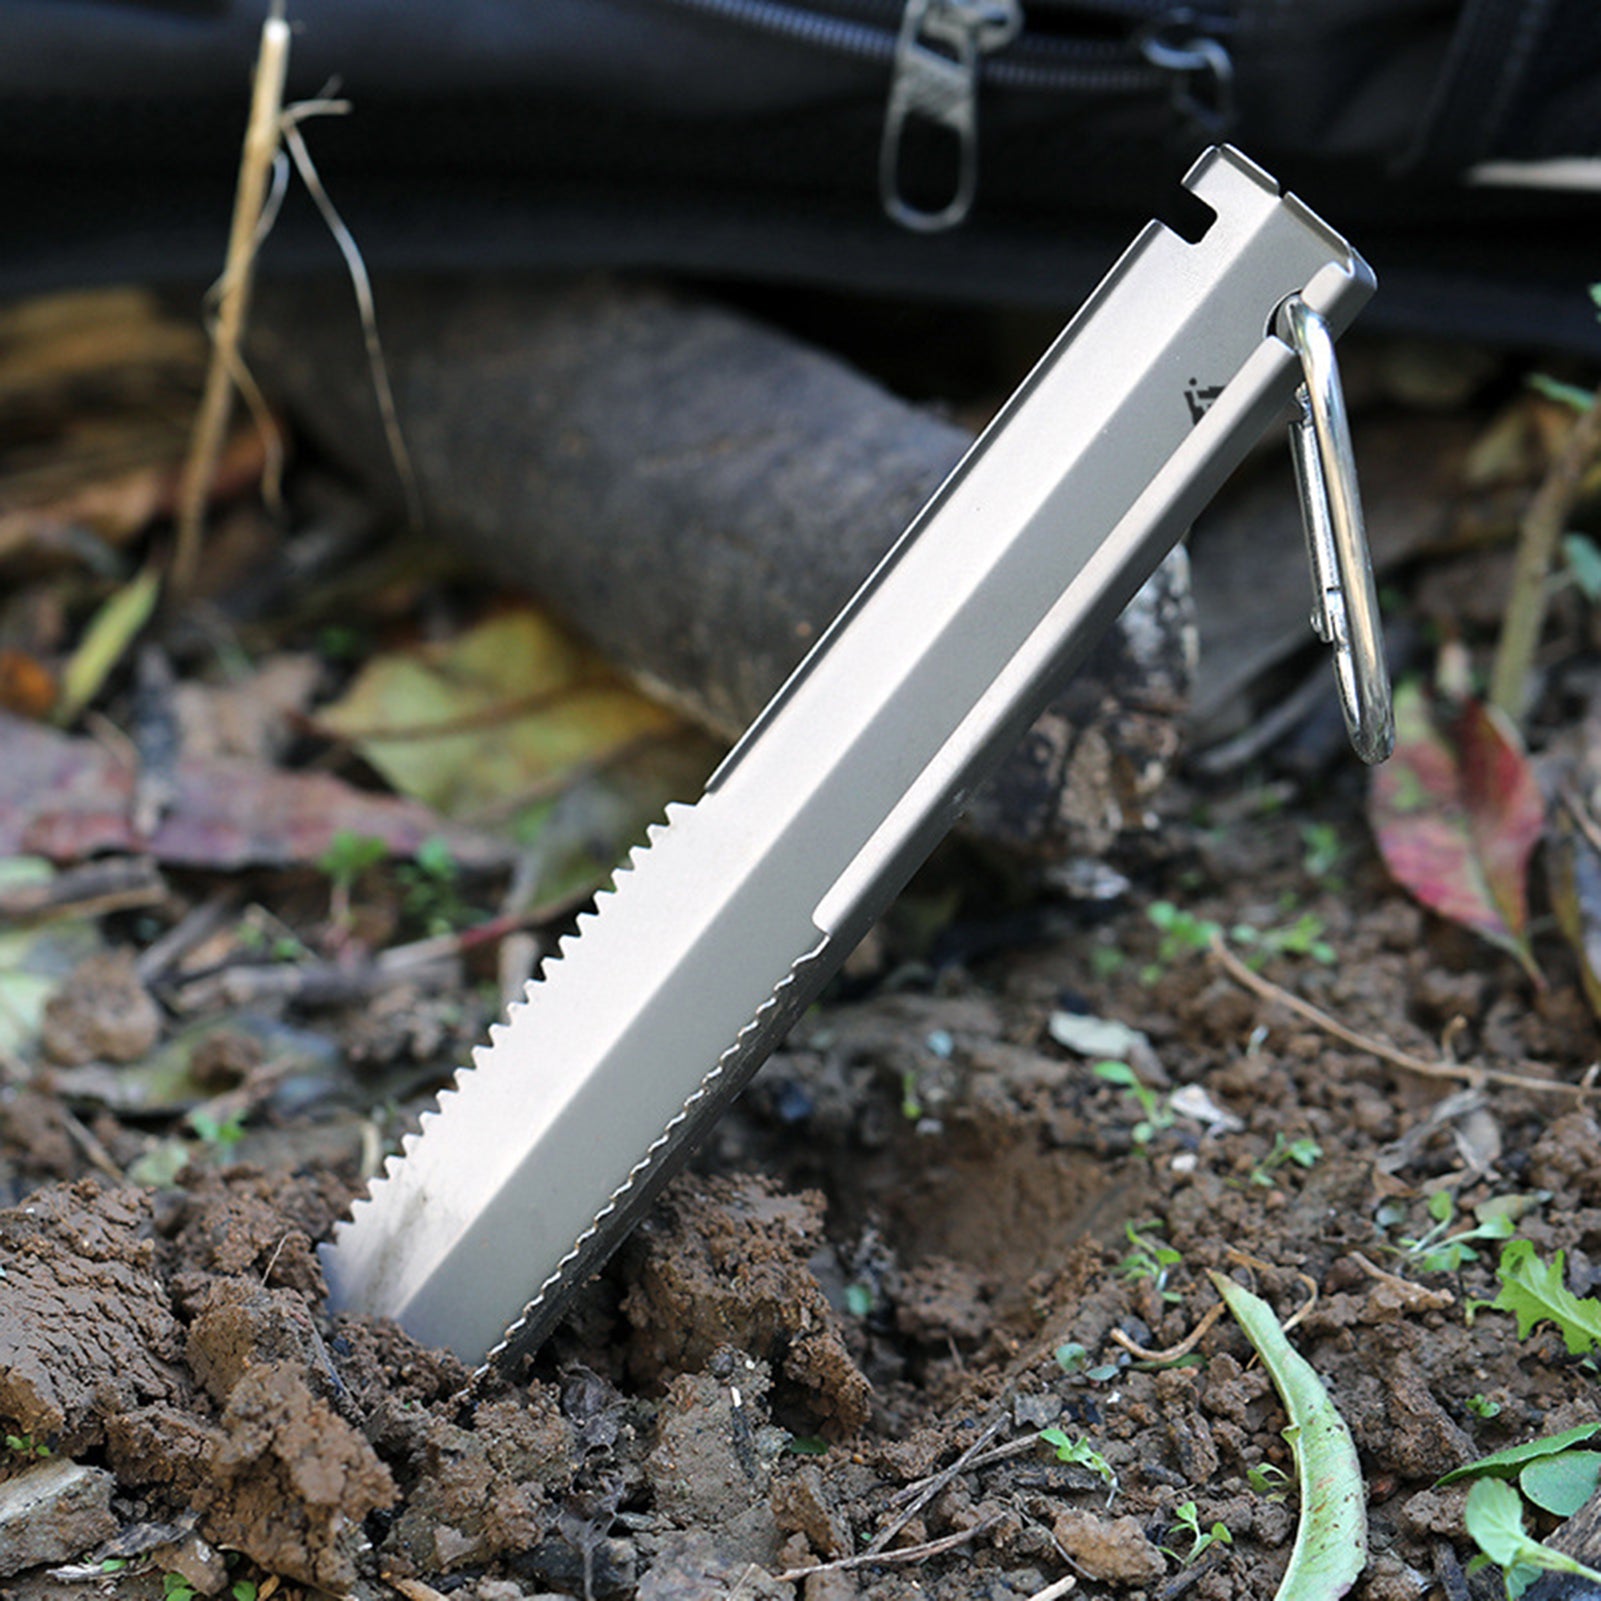 Taruor Titanium Garden Hand Serrated Shovel Outdoor Camping Hiking Backpacking Trowel with Clip